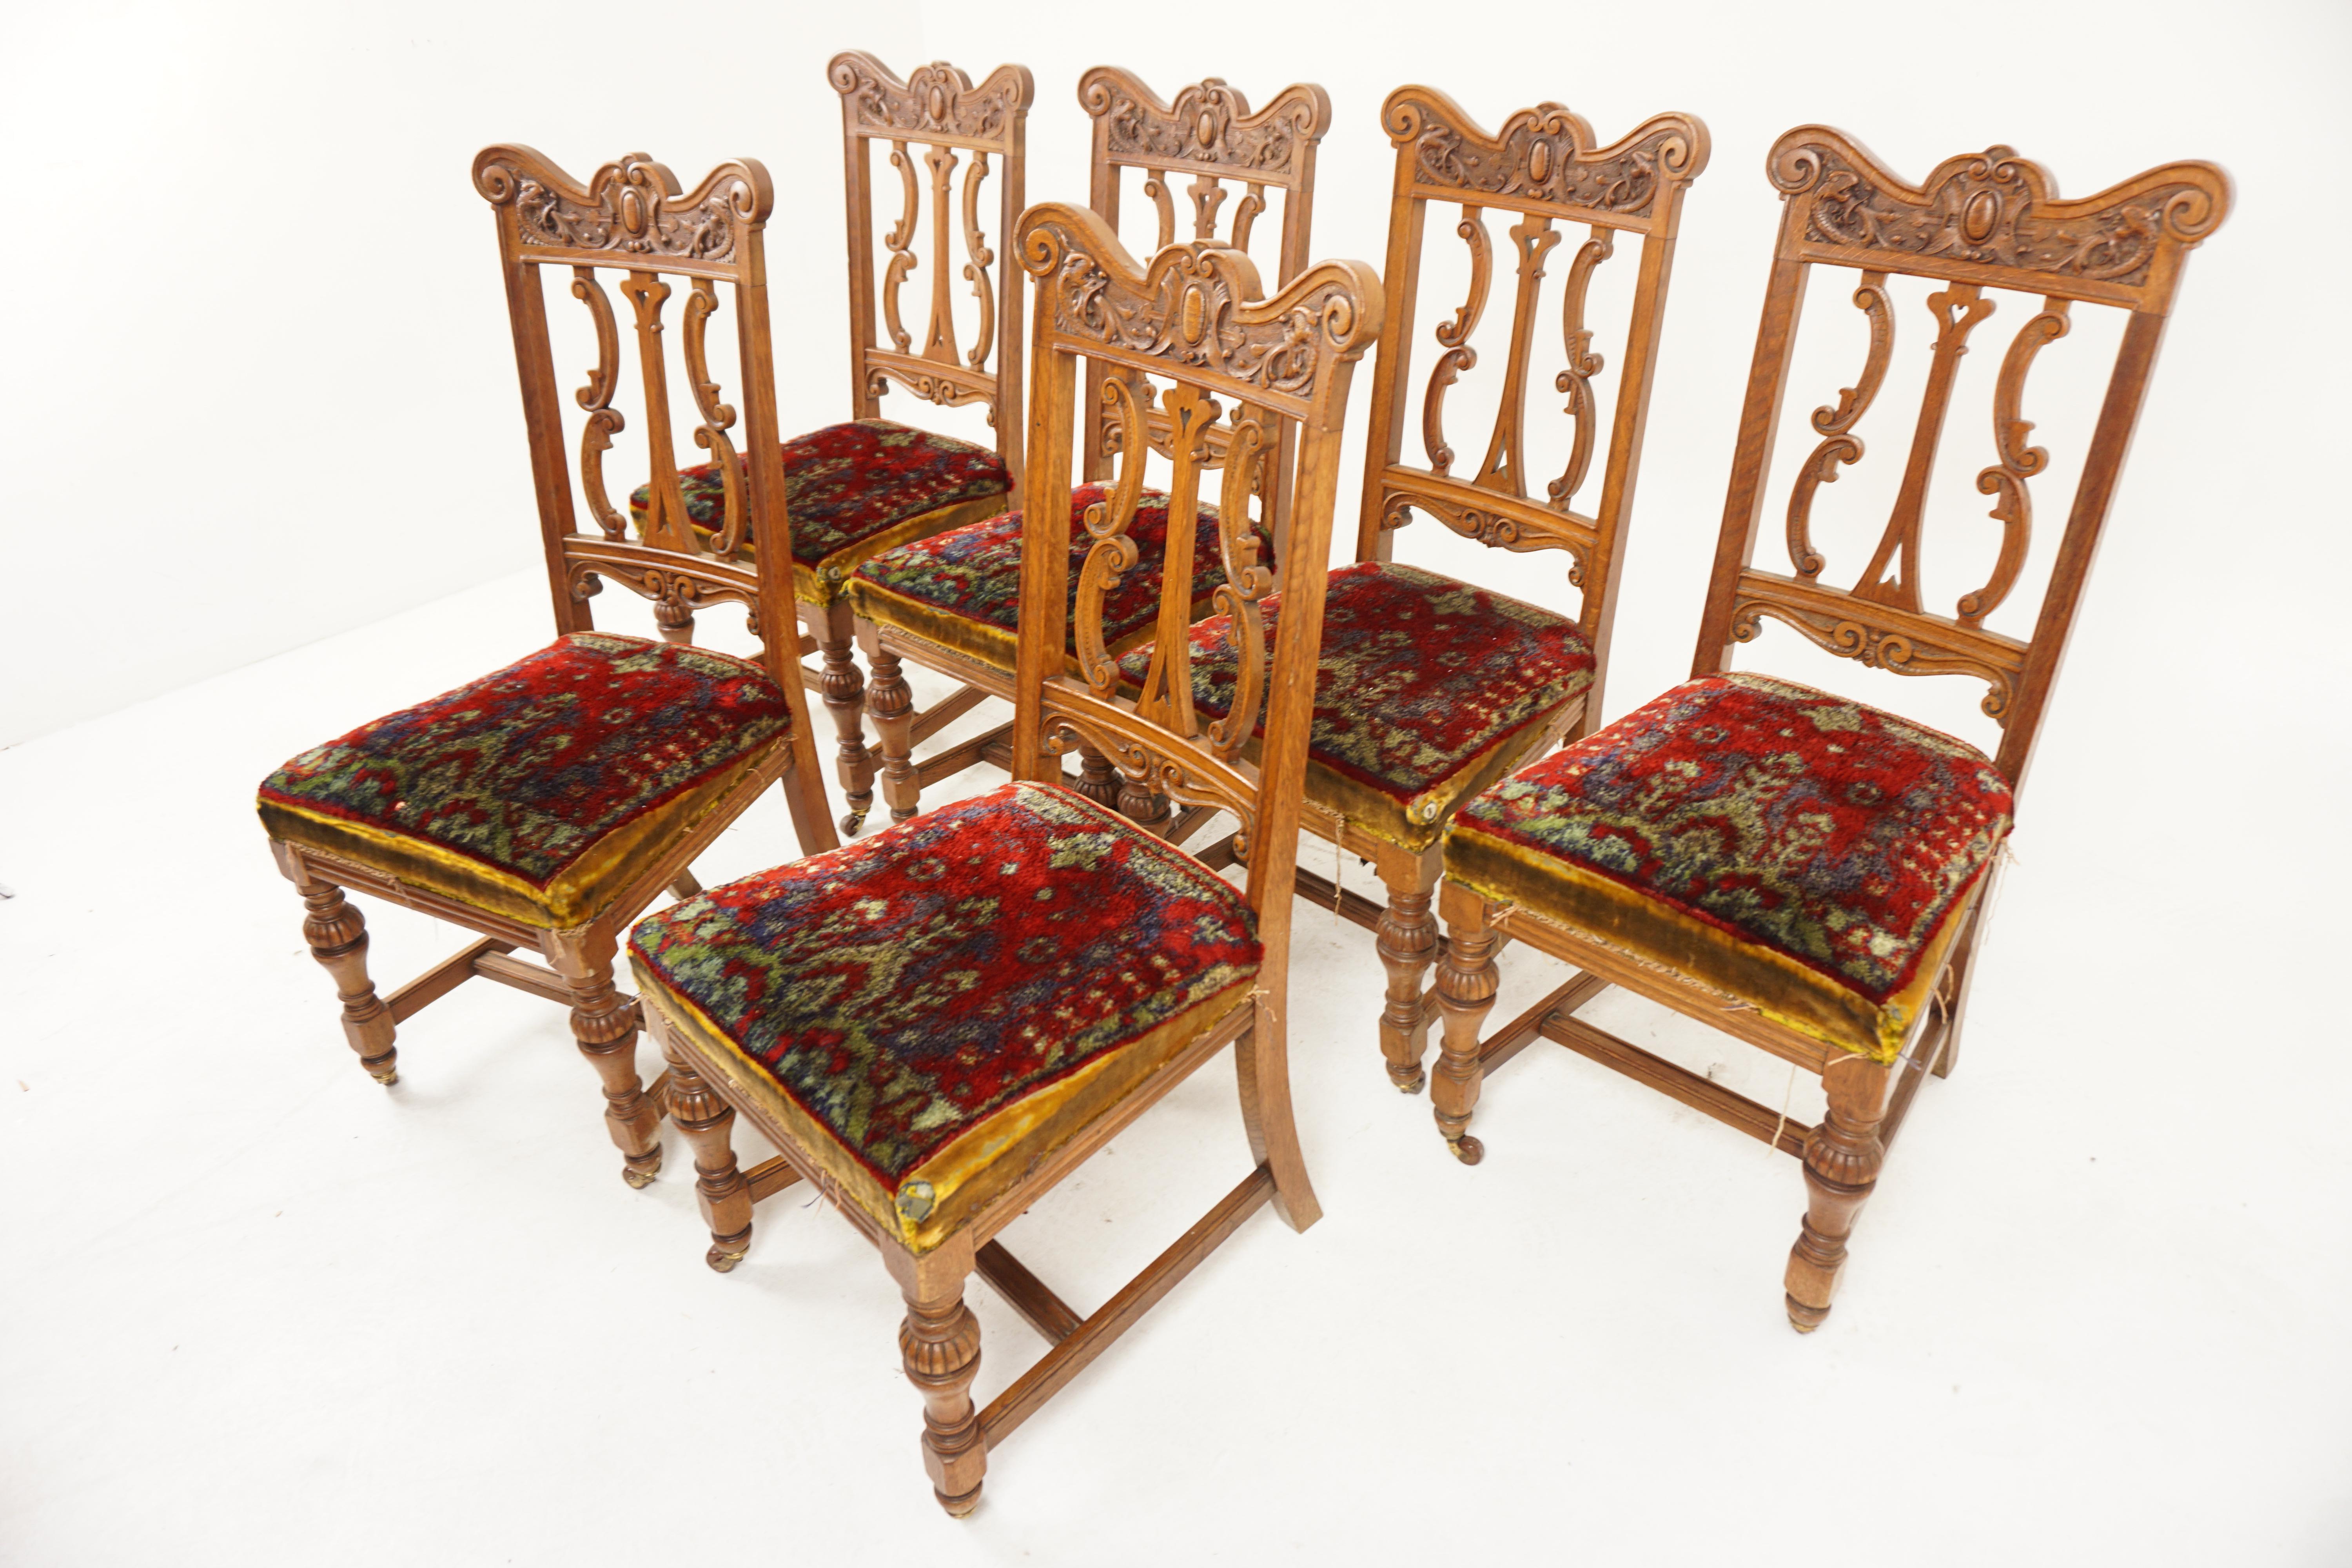 6 Heavily Carved Victorian Oak Upholstered Dining Chairs, Scotland 1880, H994

Scotland 1880
Solid Oak
Original finish
Heavily carved top rail
With sturdy supports to the ends
Three carved shaped splats on the back
Upholstered seat with spring